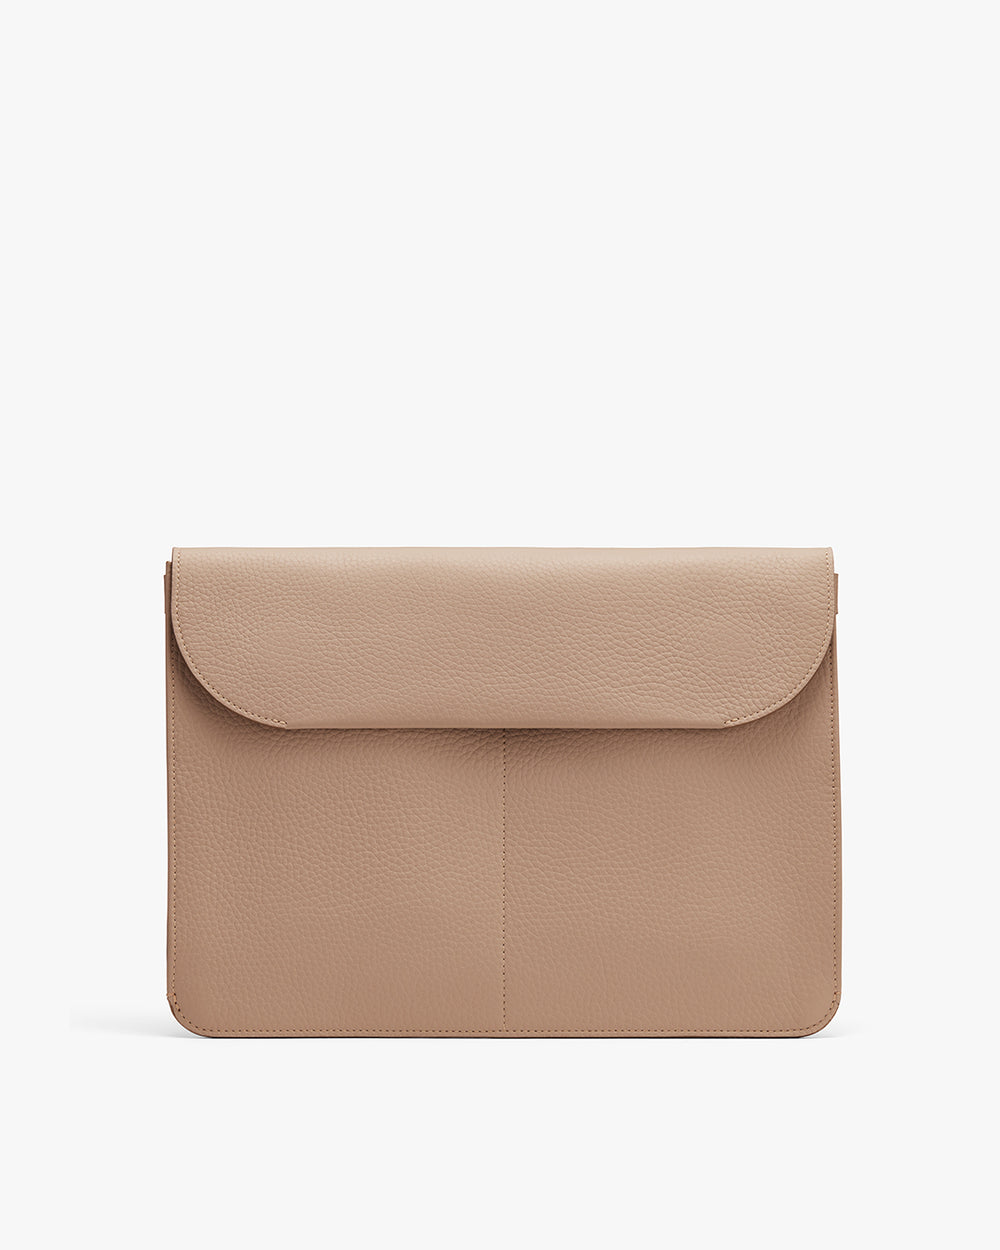 Laptop bag with flap closure on a plain background.